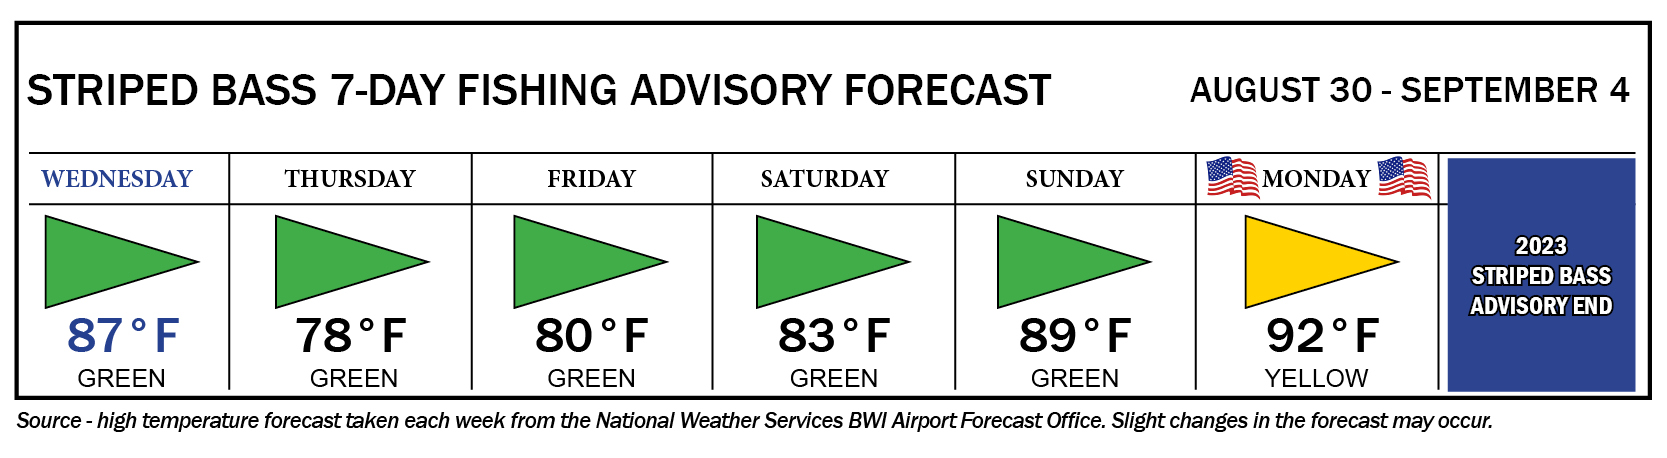 Image of Striped Bass Advisory Forecast showing green flag days Thursday and Friday; yellow flag day on Wednesday.; and a closed fishery from Saturday forward.